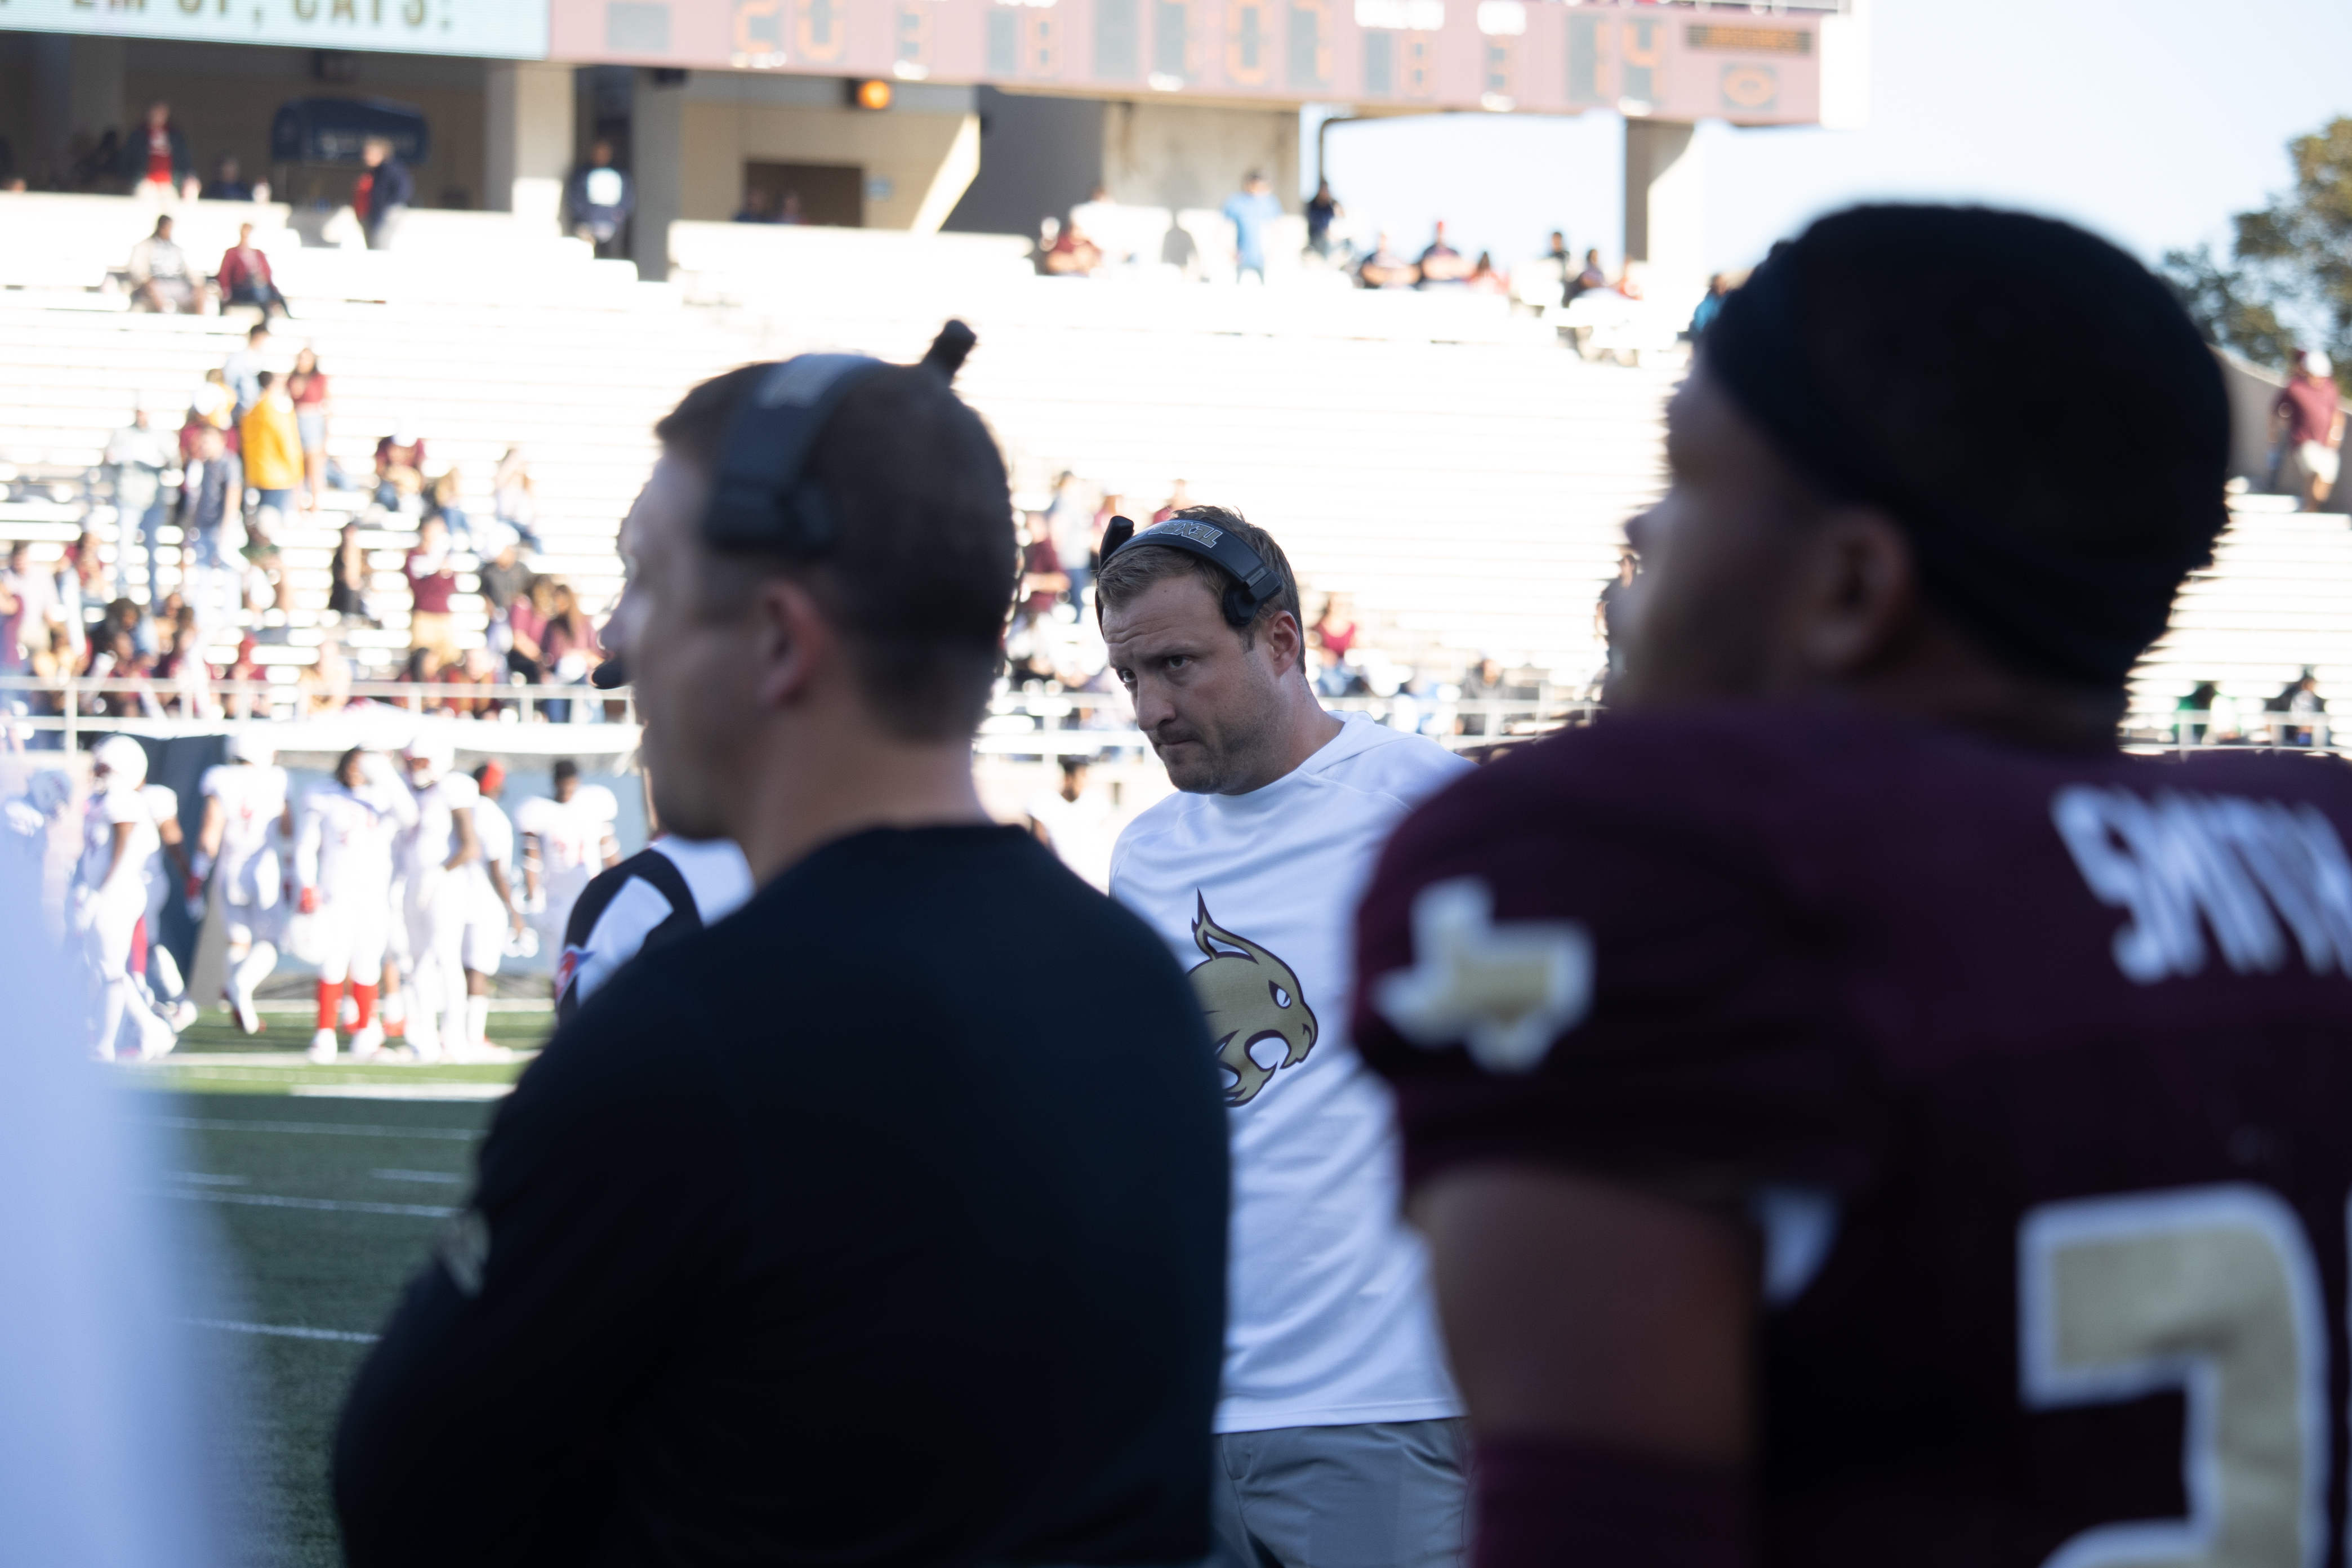 Jake Spavital is between a football player and a coach in the photograph on the sideline.